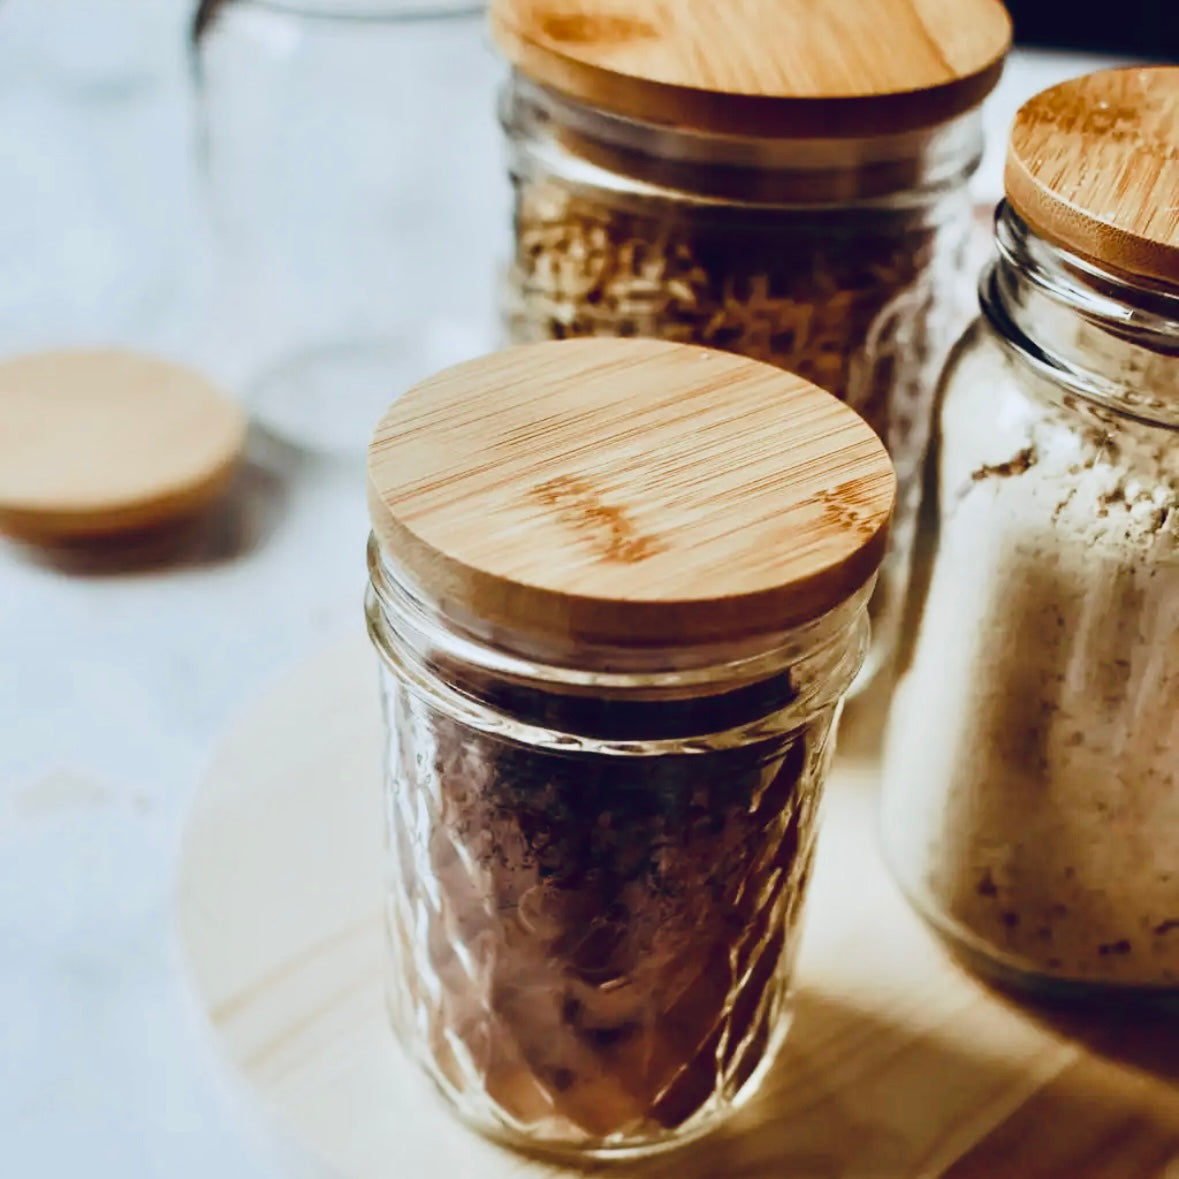 Bamboo Lid for Mason Jar with Straw Hole Standard